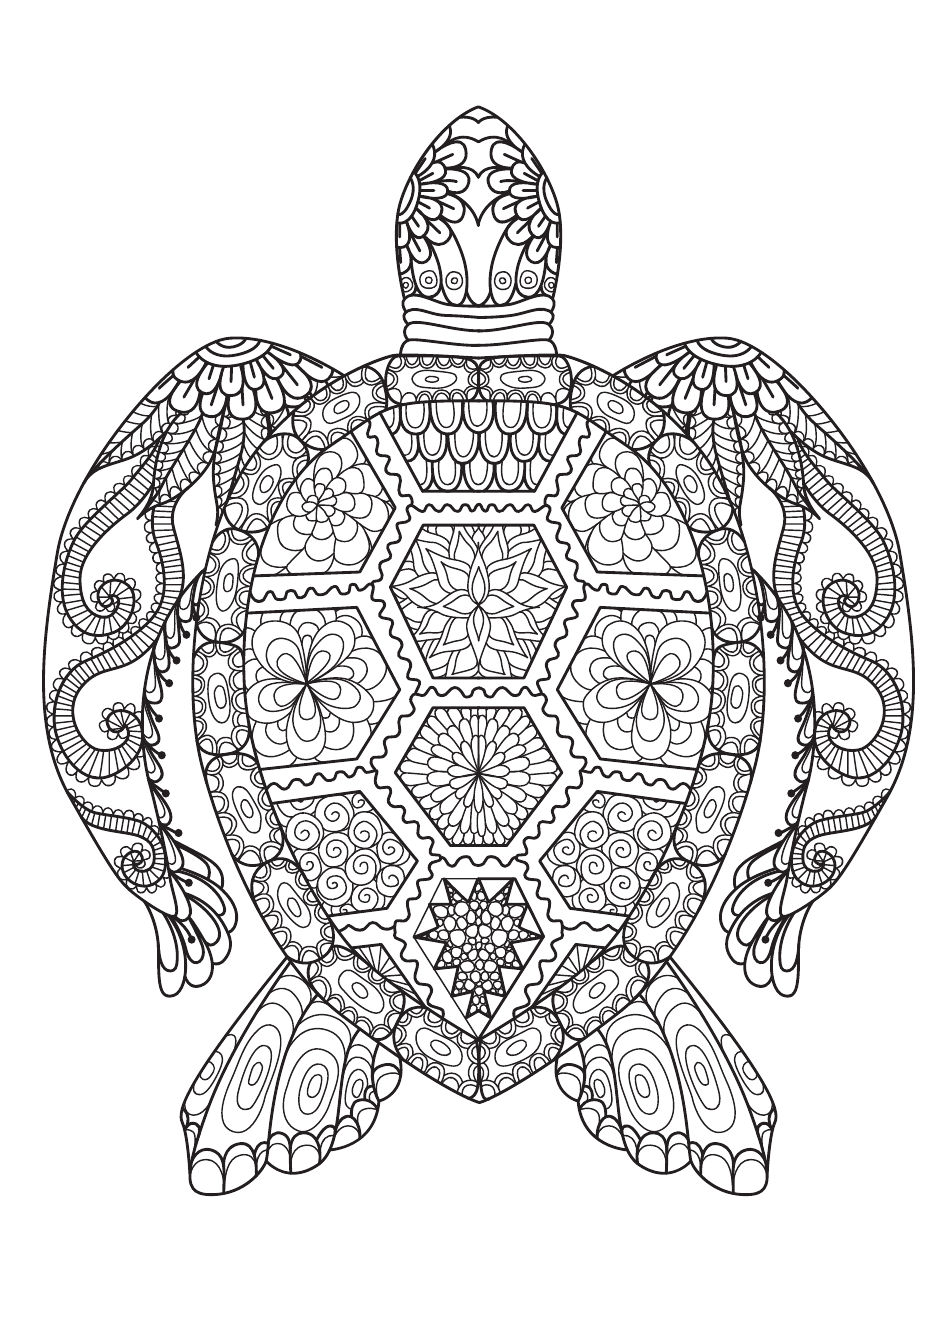 Turtle adult coloring page